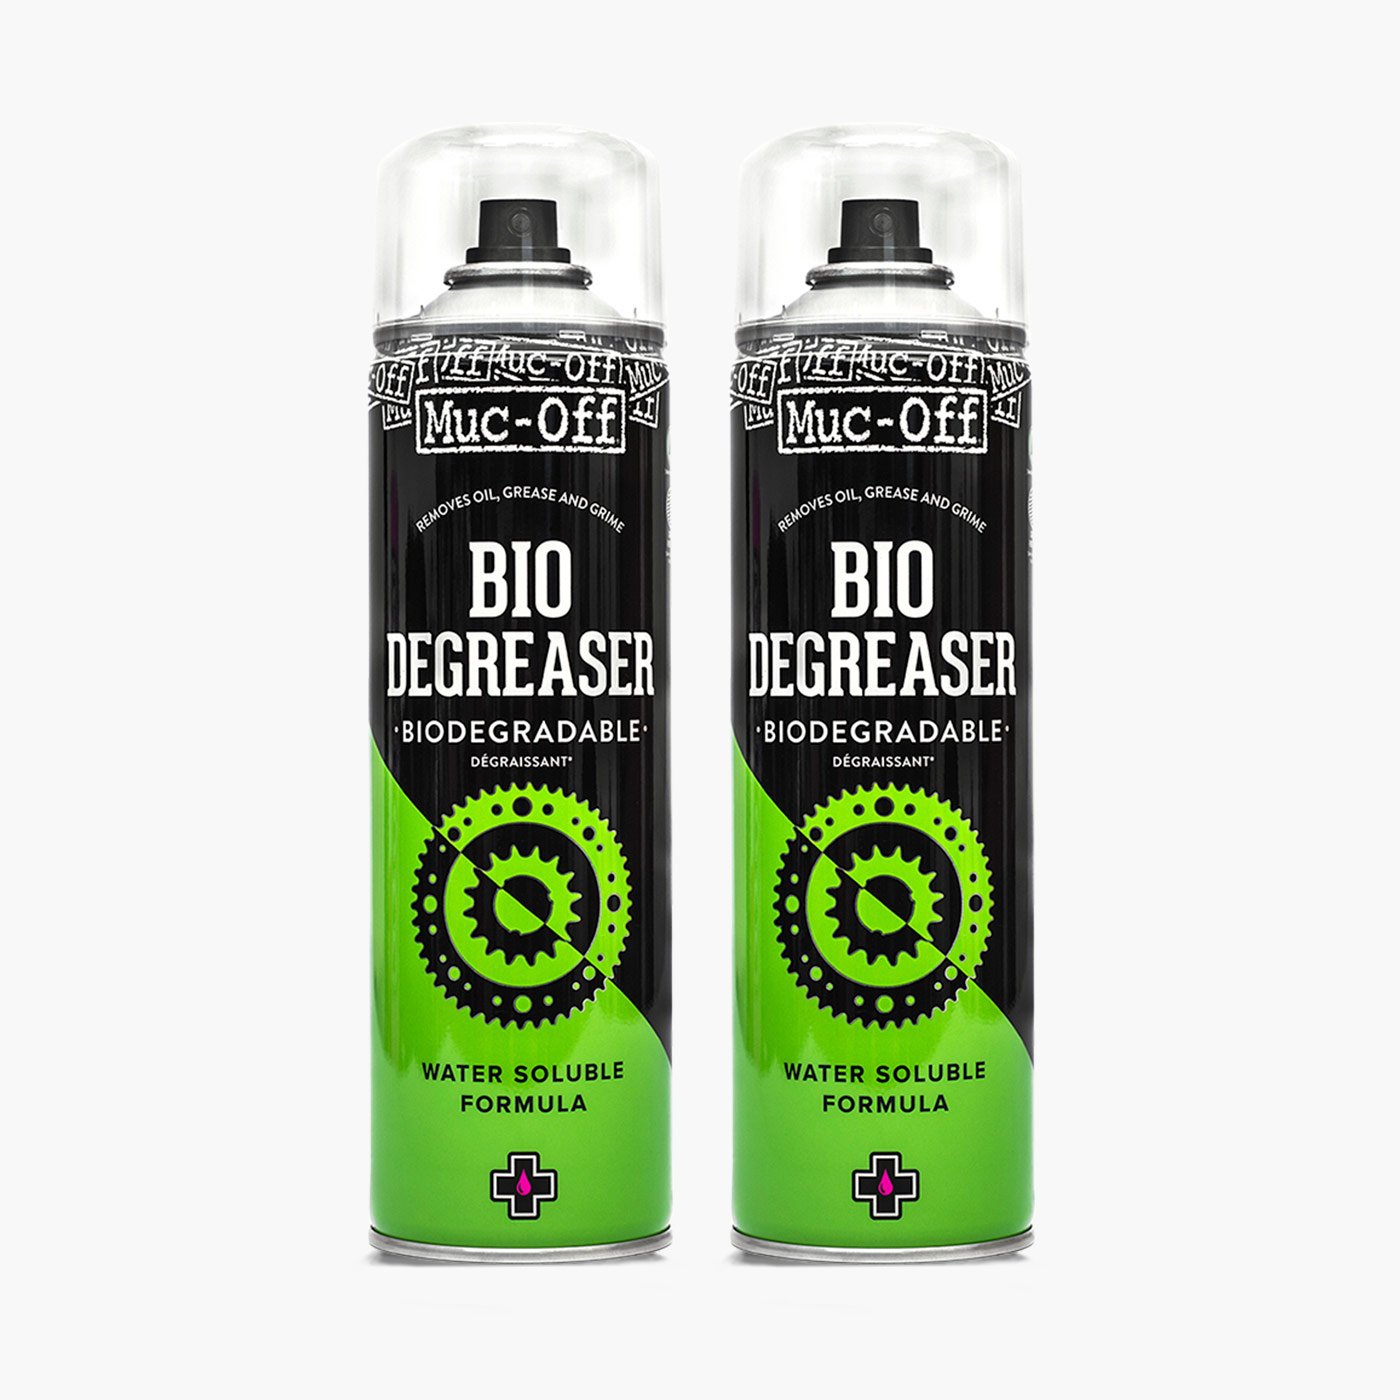 WPL Bio-Solvent Bike Degreaser 473ml - Premium Bike Chain Degreaser Cleaner  with Liquid Spray Function for Road and Mountain Bikes